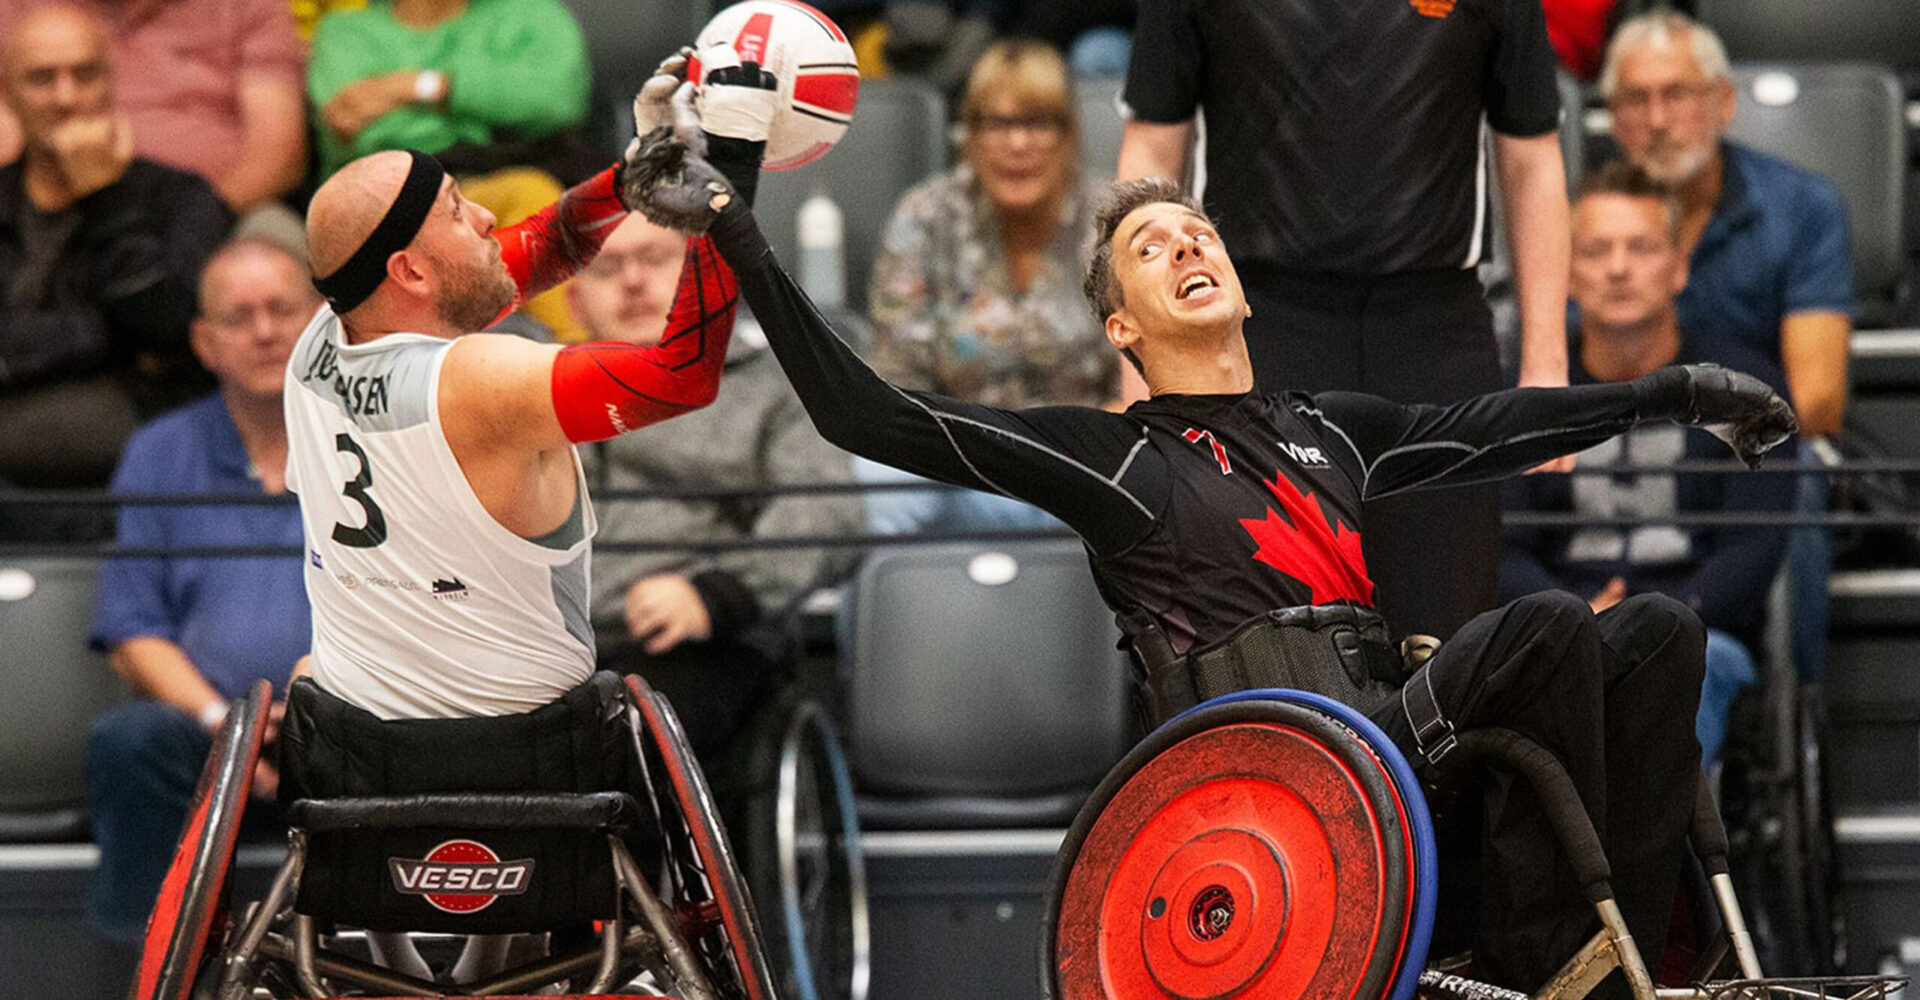 Canada sets up USA quarterfinal duel at 2022 Wheelchair Rugby World Championship